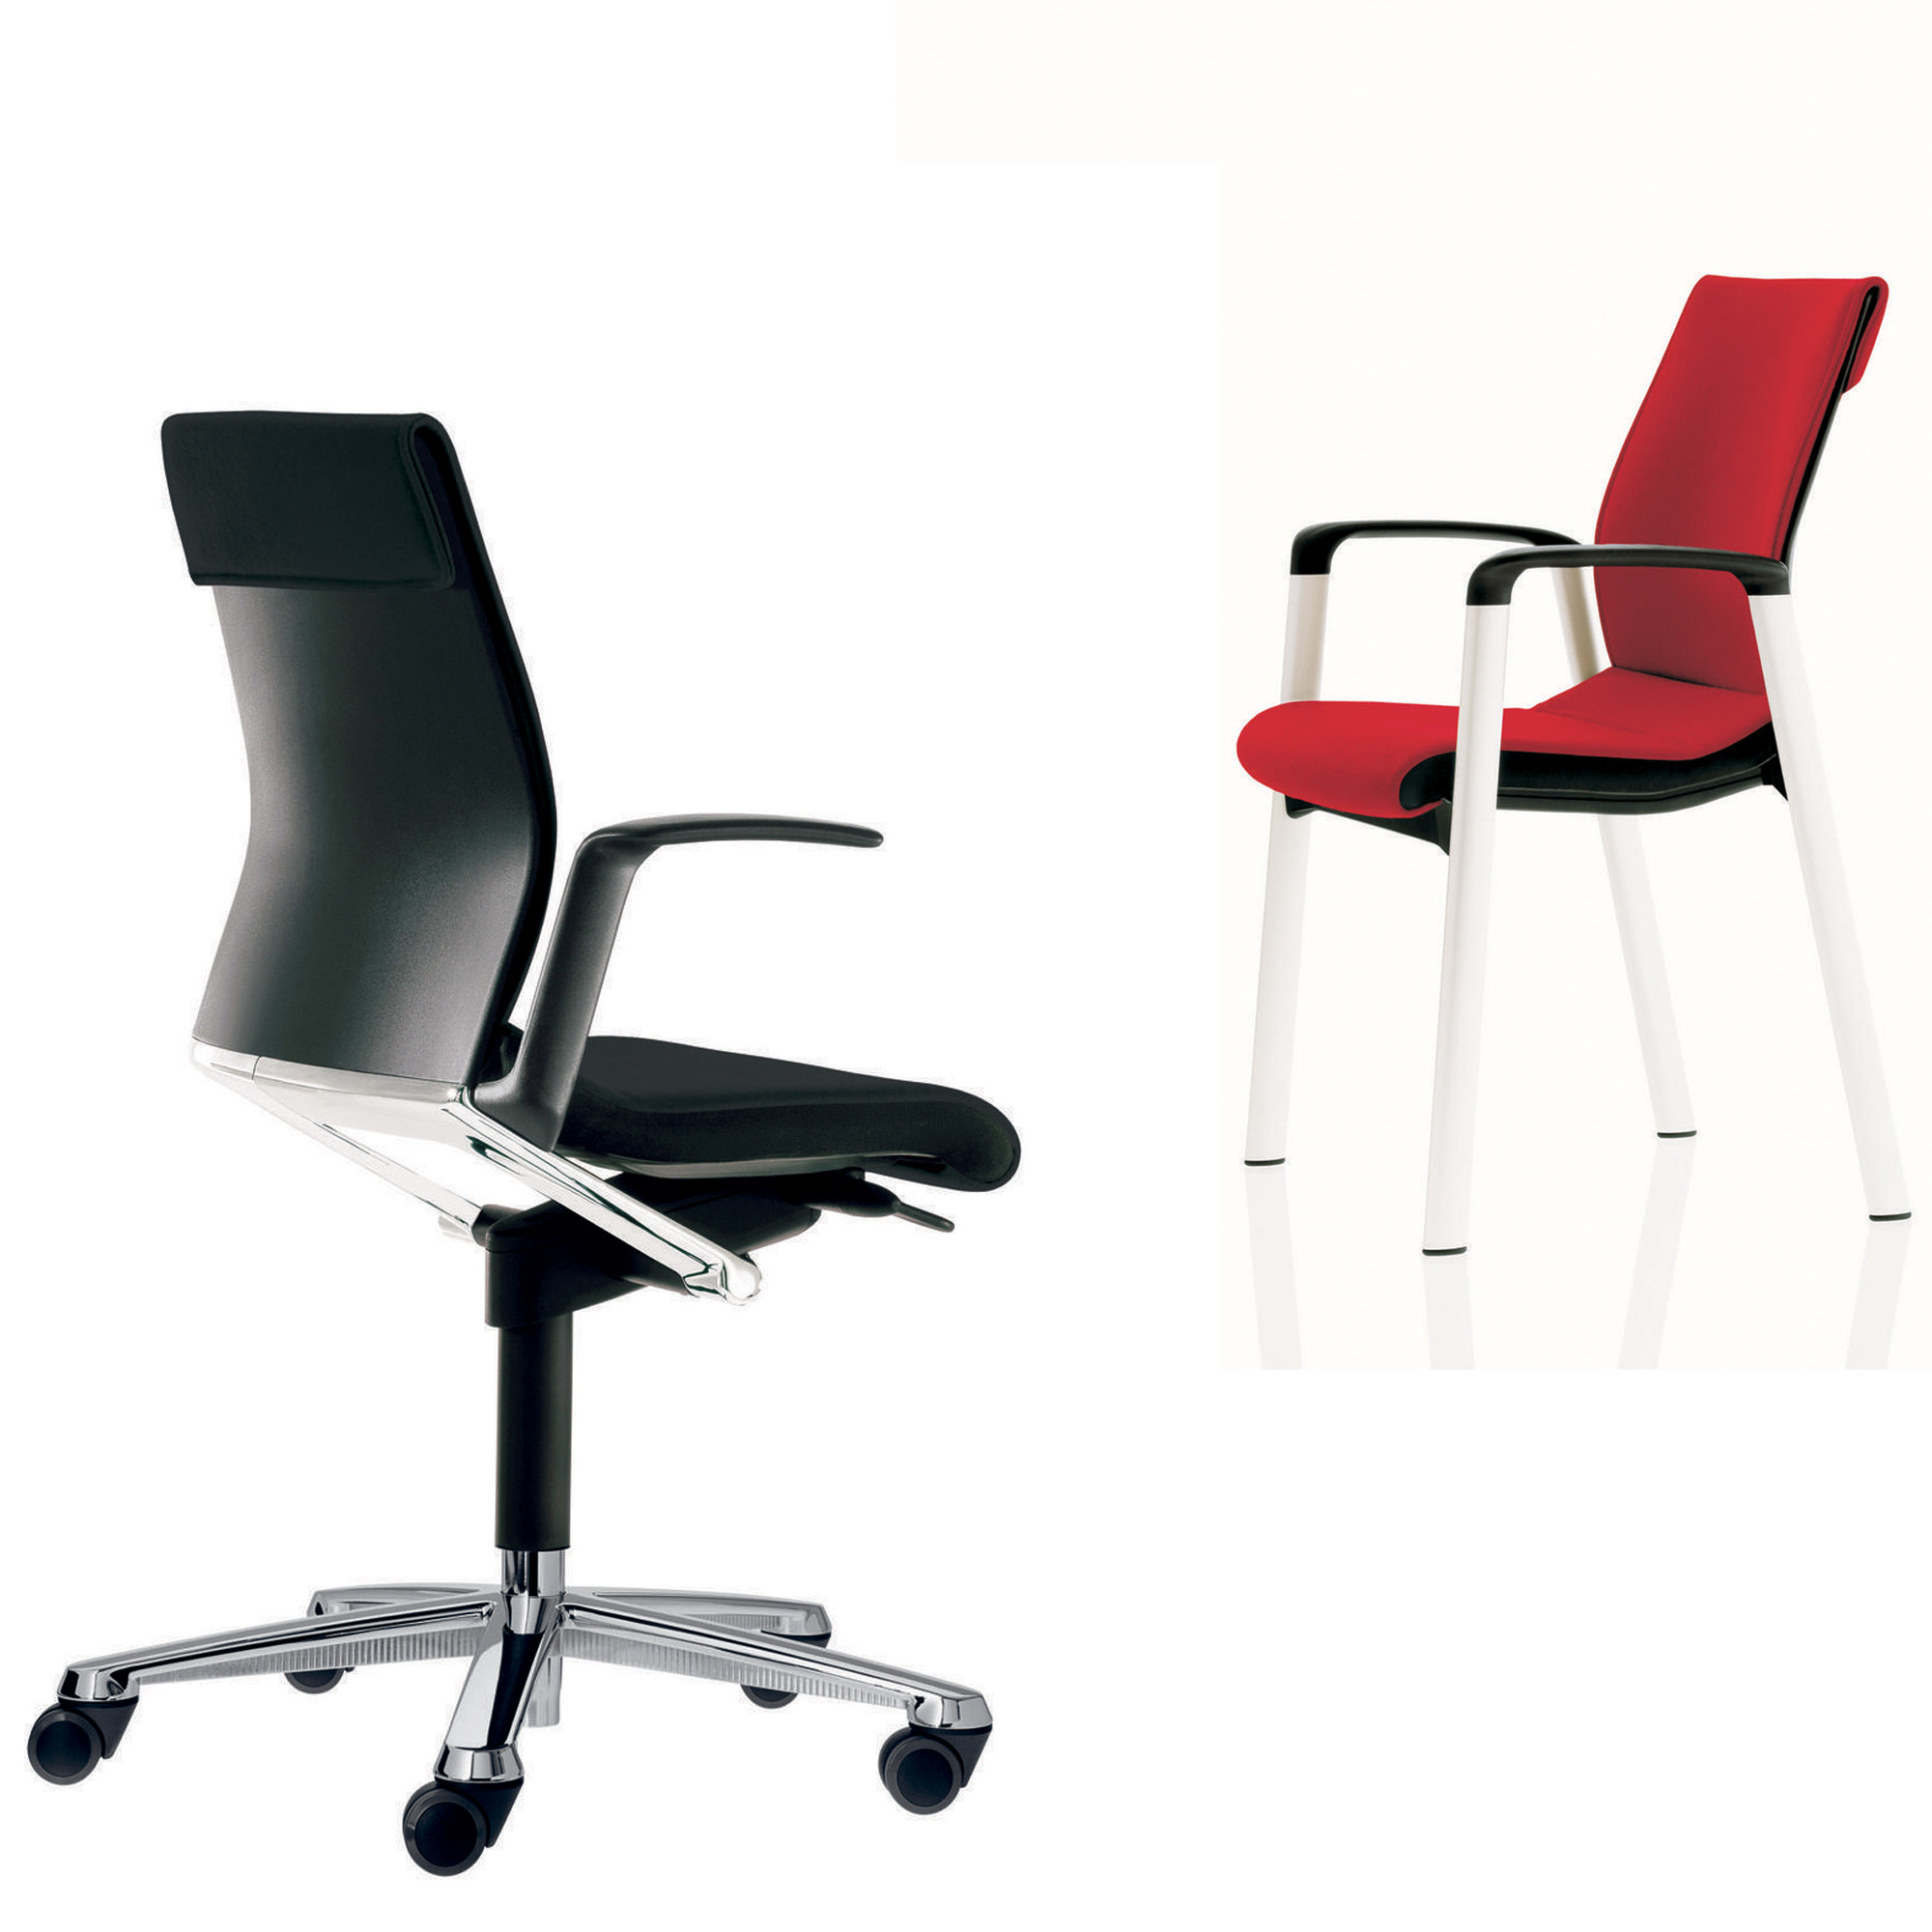 Modus Basic Office Chairs